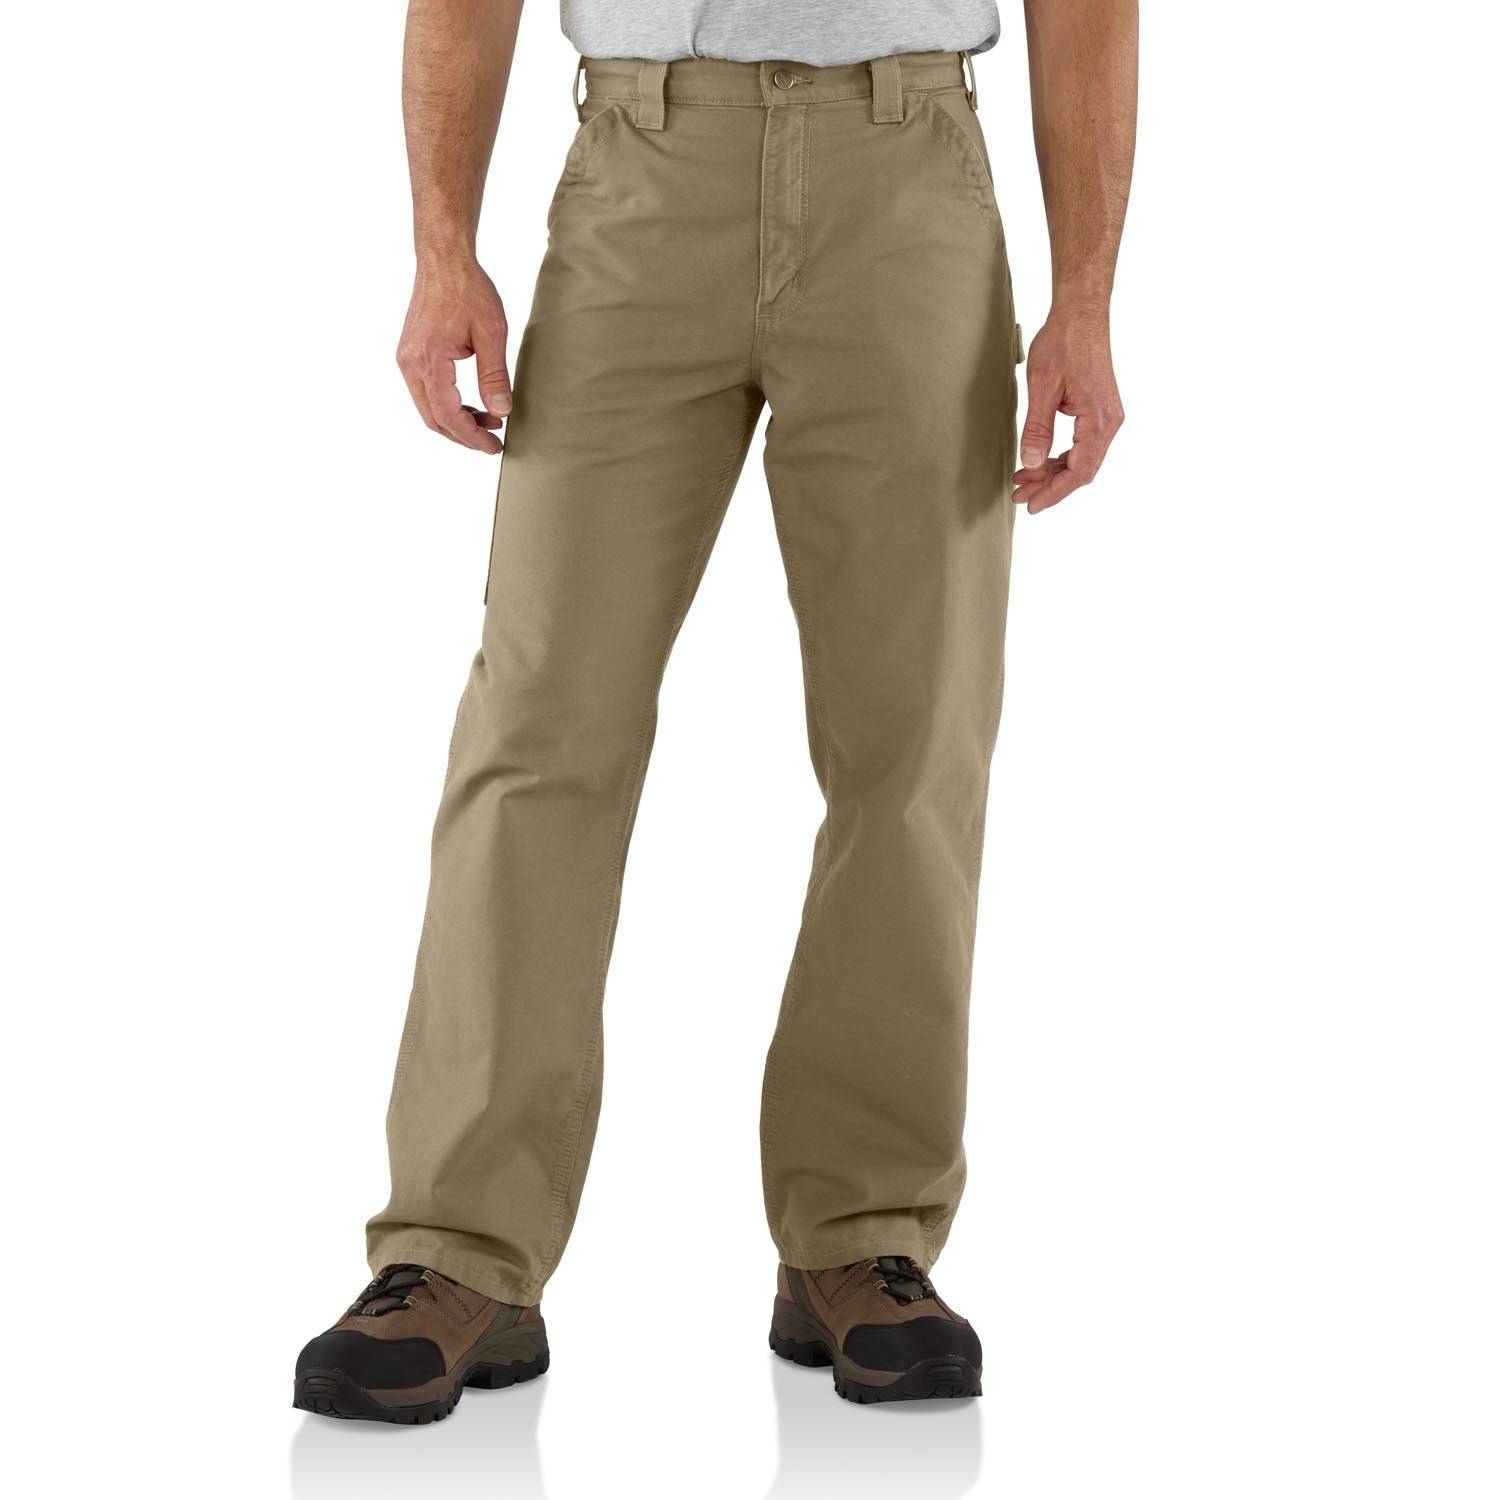 CARHARTT LOOSE FIT CANVAS UTILITY WORK PANTS